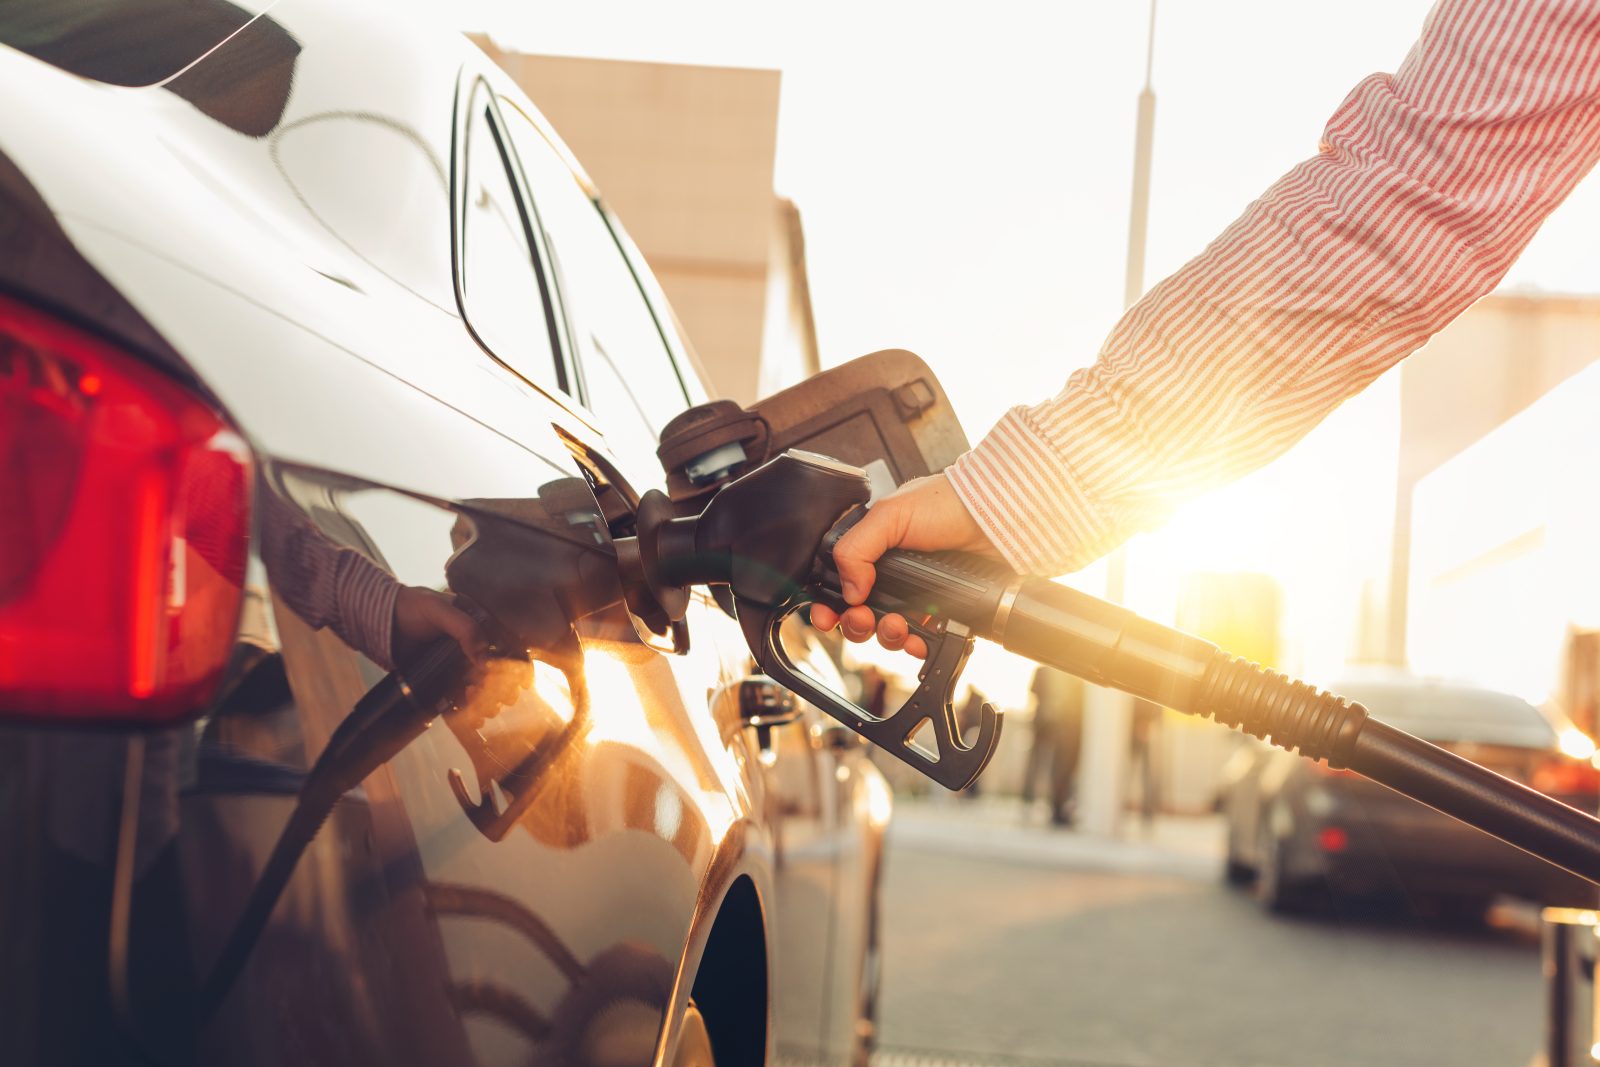 Top 10 fuel savings tips you should know